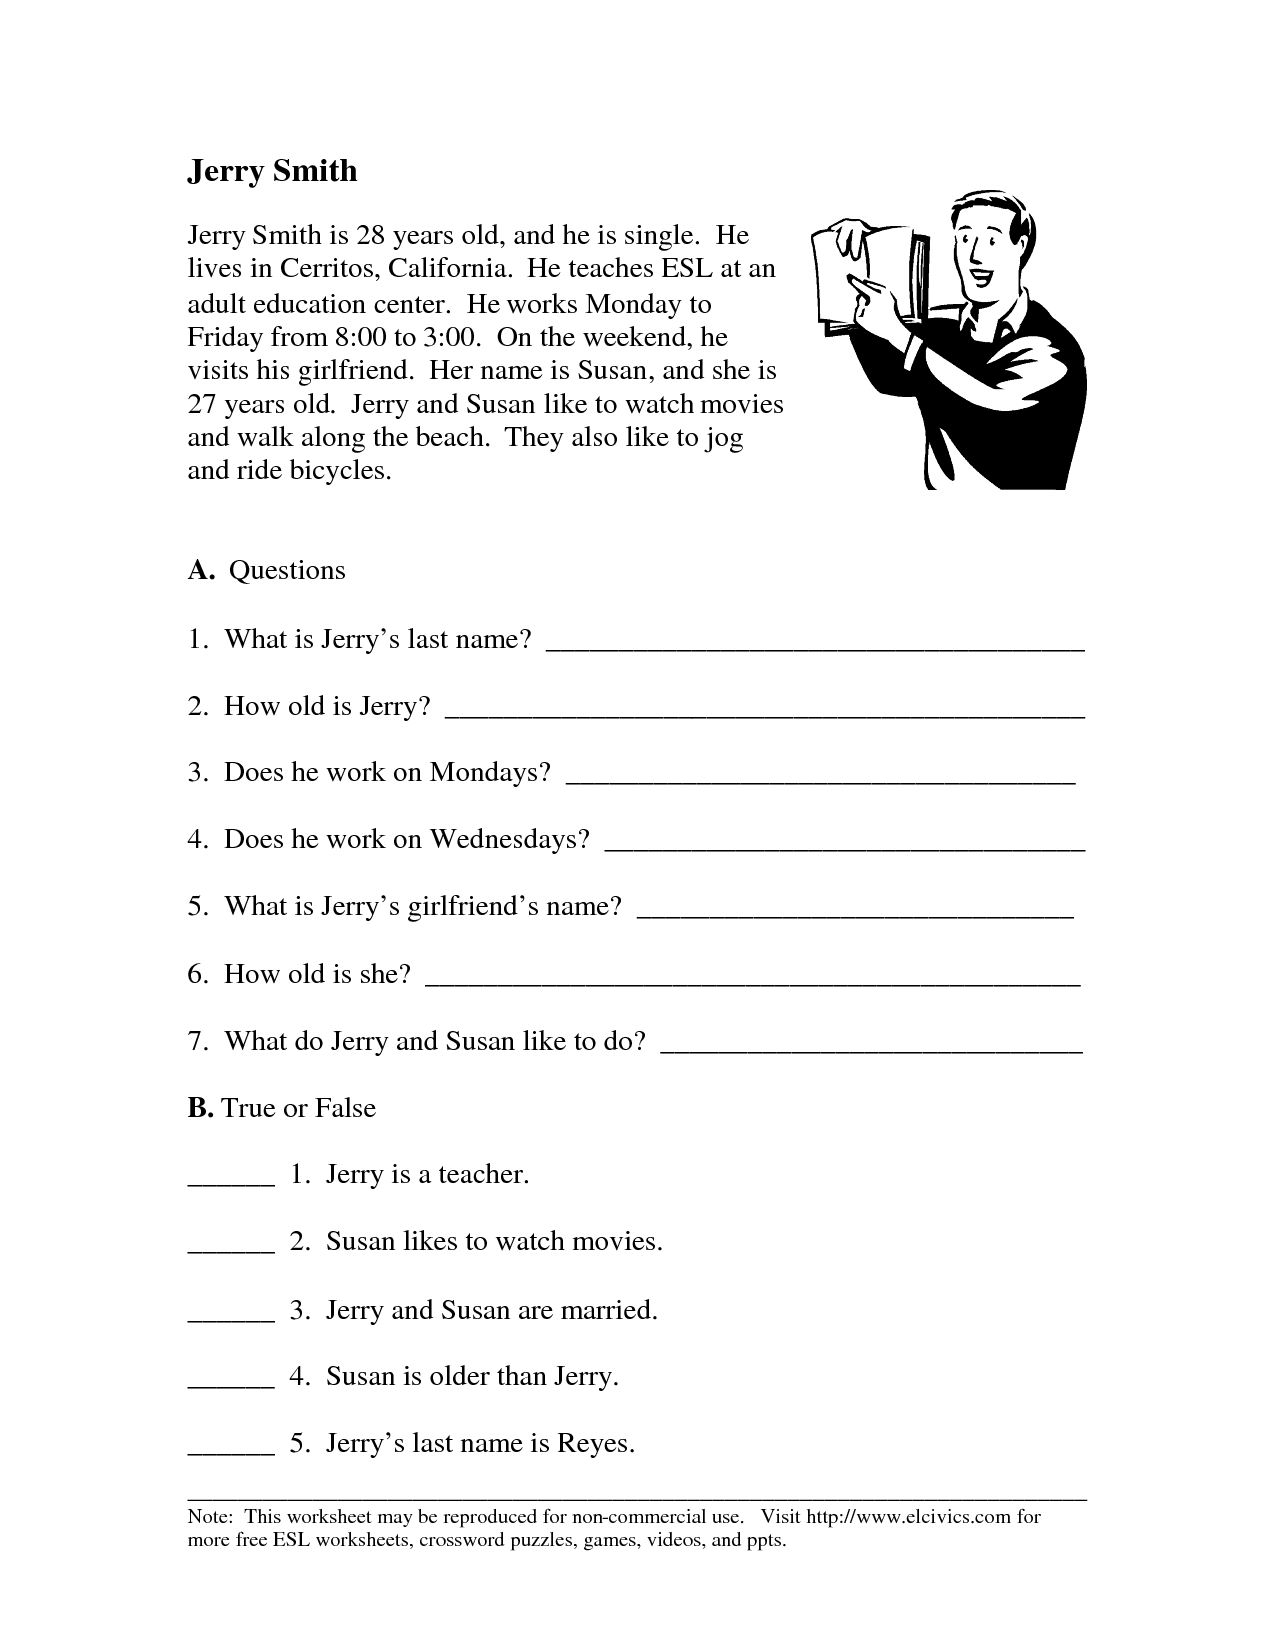 Writing Worksheets for ESL Students